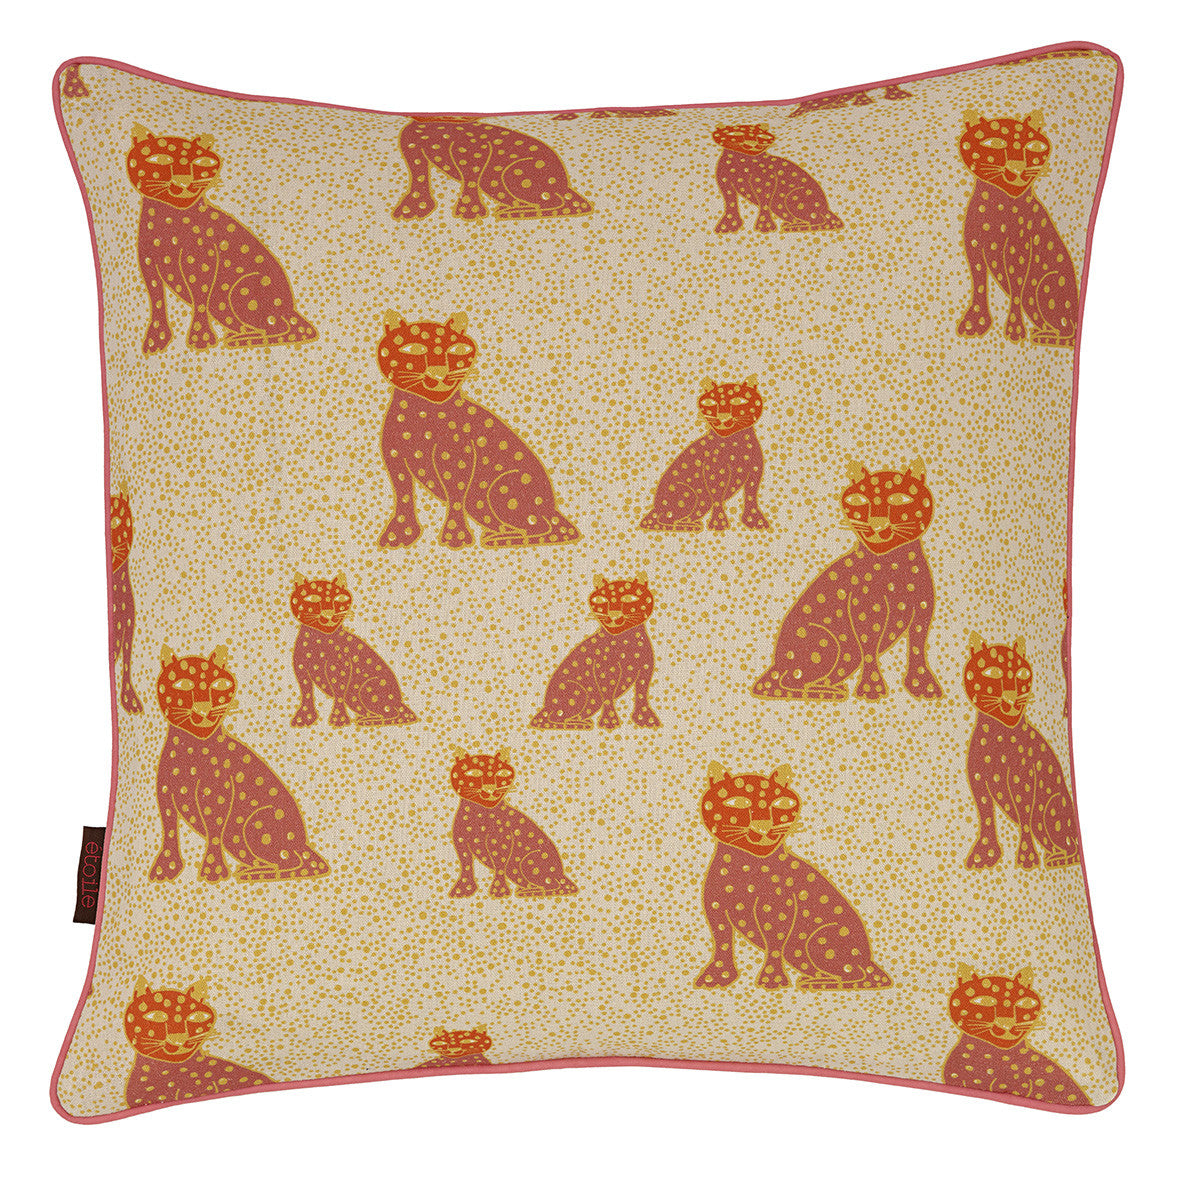 Graphic Leopard Pattern Linen Union Printed Decorative Throw Pillow in Coral Pink, Pumpkin and Mustard Yellow 45x45cm (18x18")